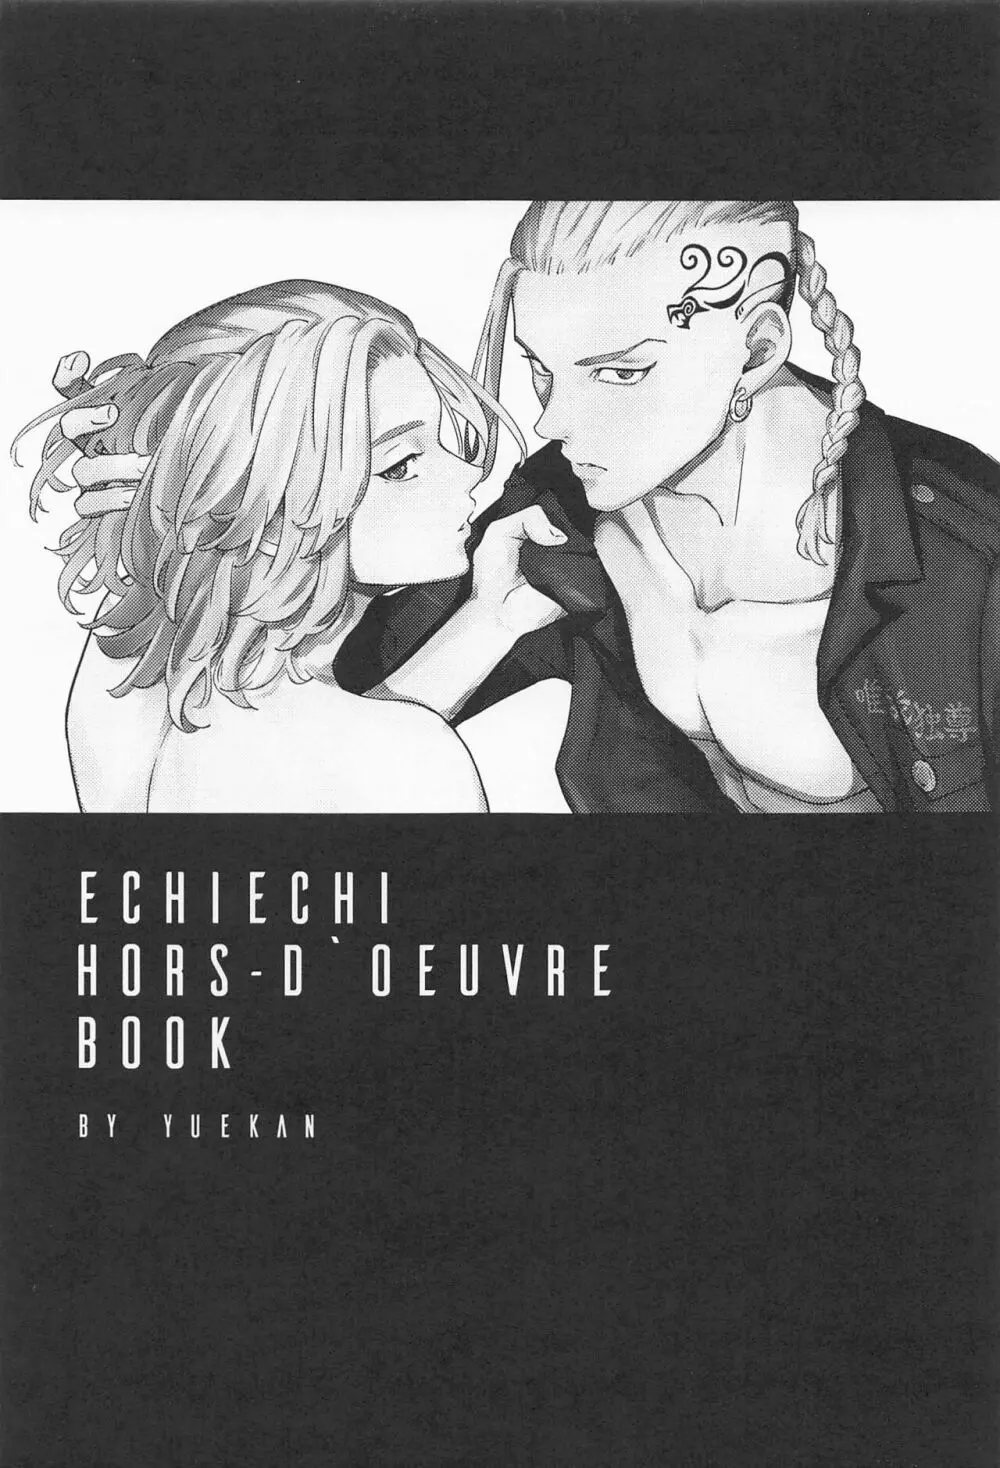 ECHI ECHI HORS－D’OEUVRE BOOK Page.2